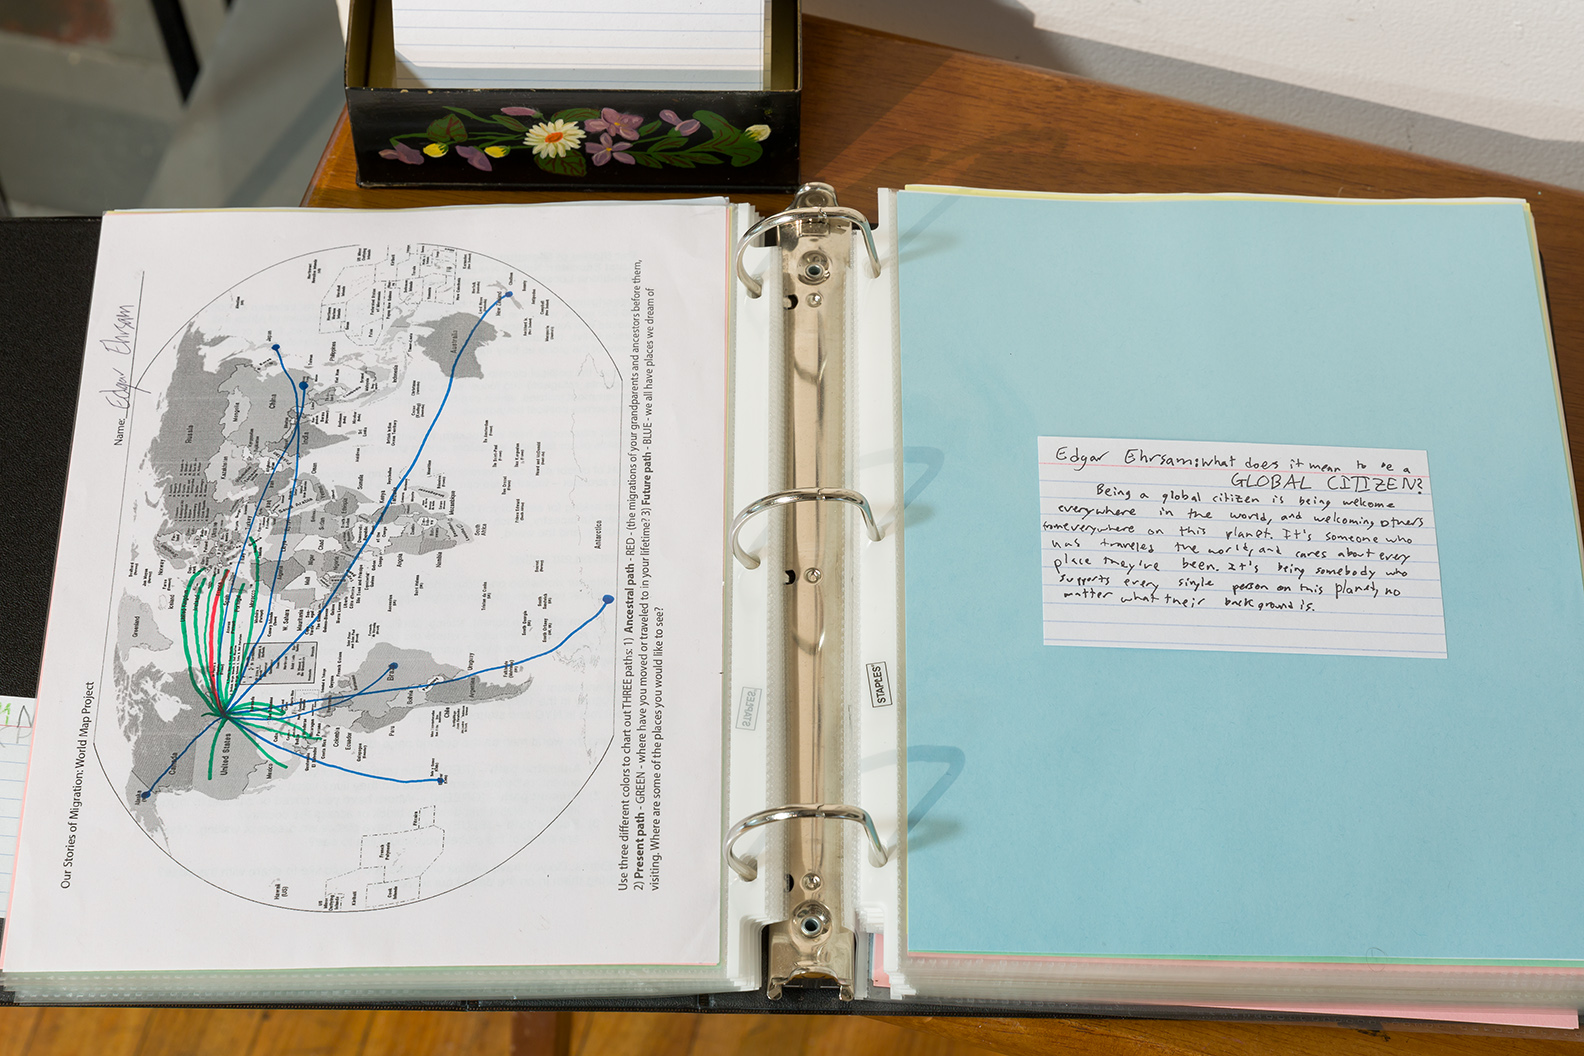  Mapping binder and view of student photo grid - pat of "Our Stories of Migration"  Photo credit: Etienne Frossard 